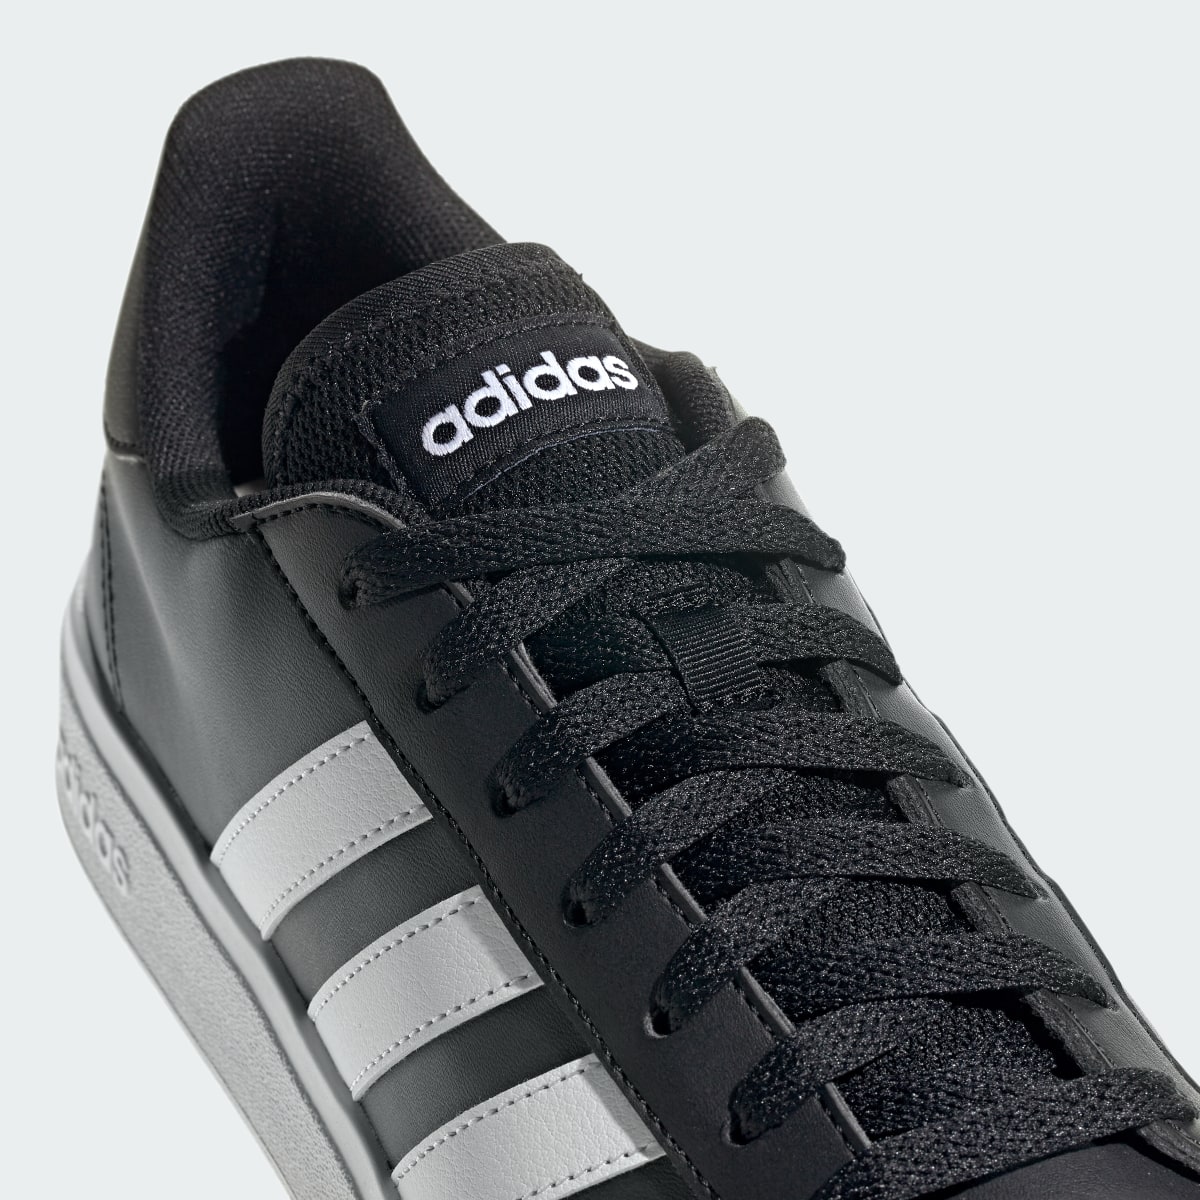 Adidas Tenis adidas Grand Court TD Lifestyle Court Casual. 8